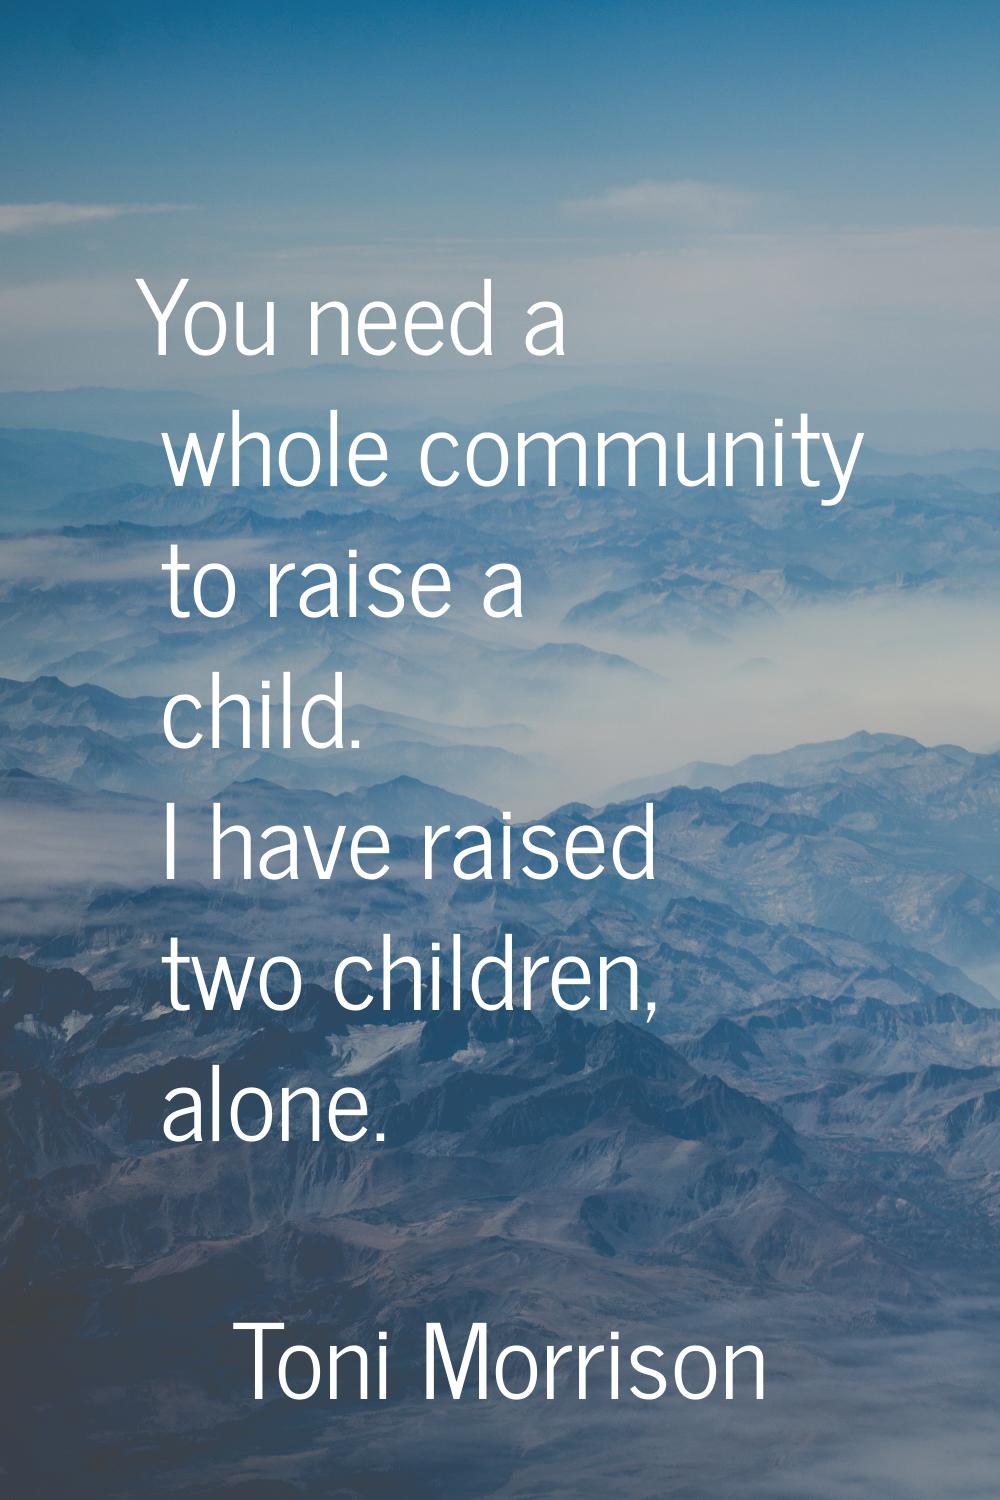 You need a whole community to raise a child. I have raised two children, alone.